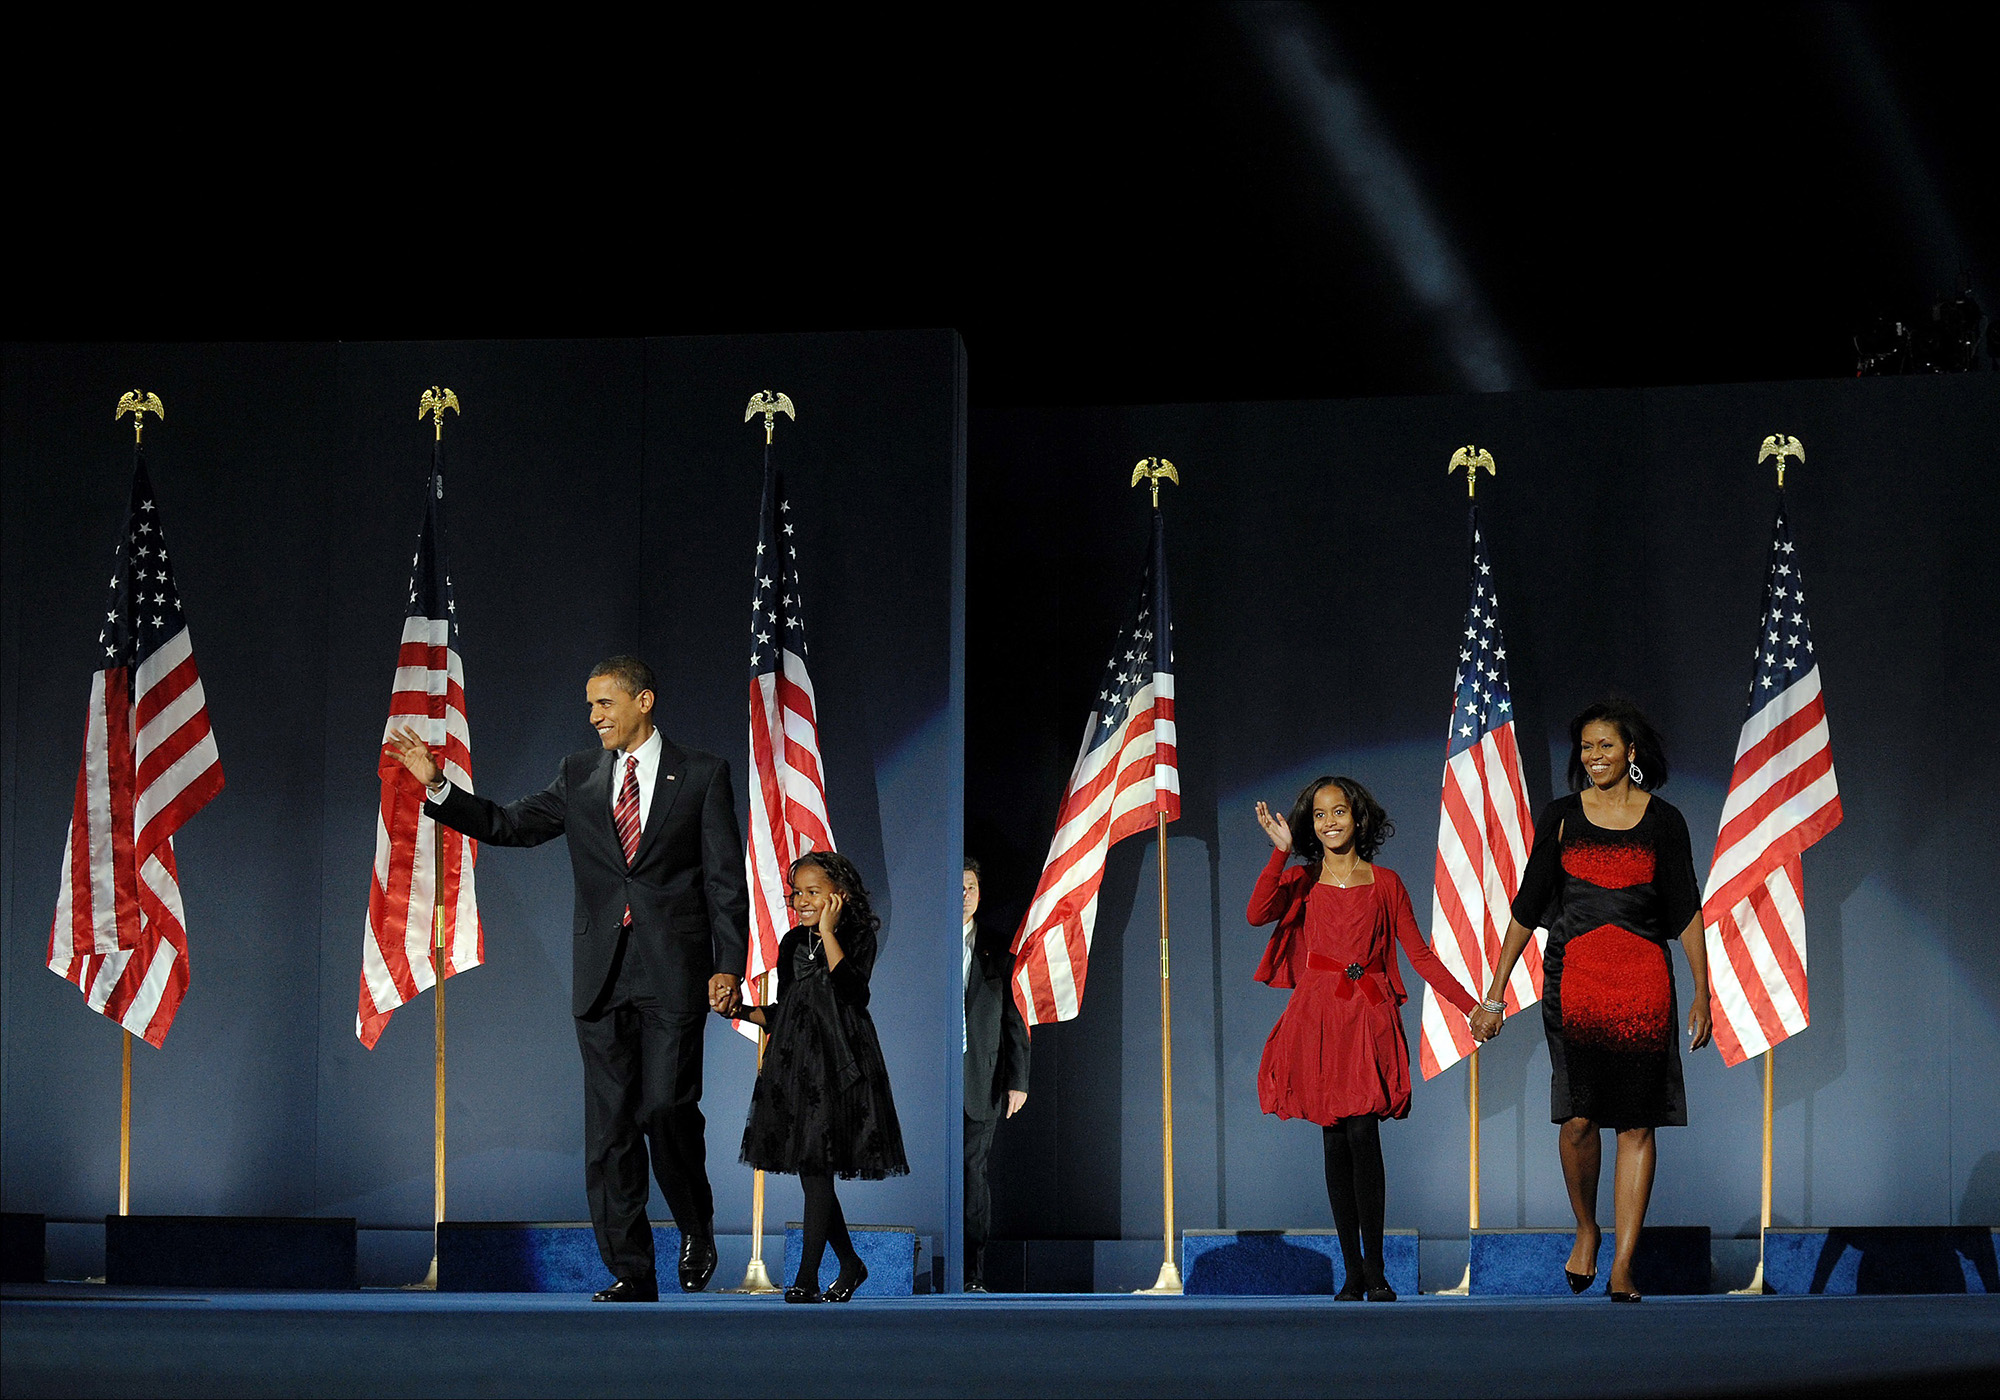 PHOTO: Barack Obama with his daughters Sasha and Malia, and wife Michelle on election night in Chicago, Nov. 5, 2008.